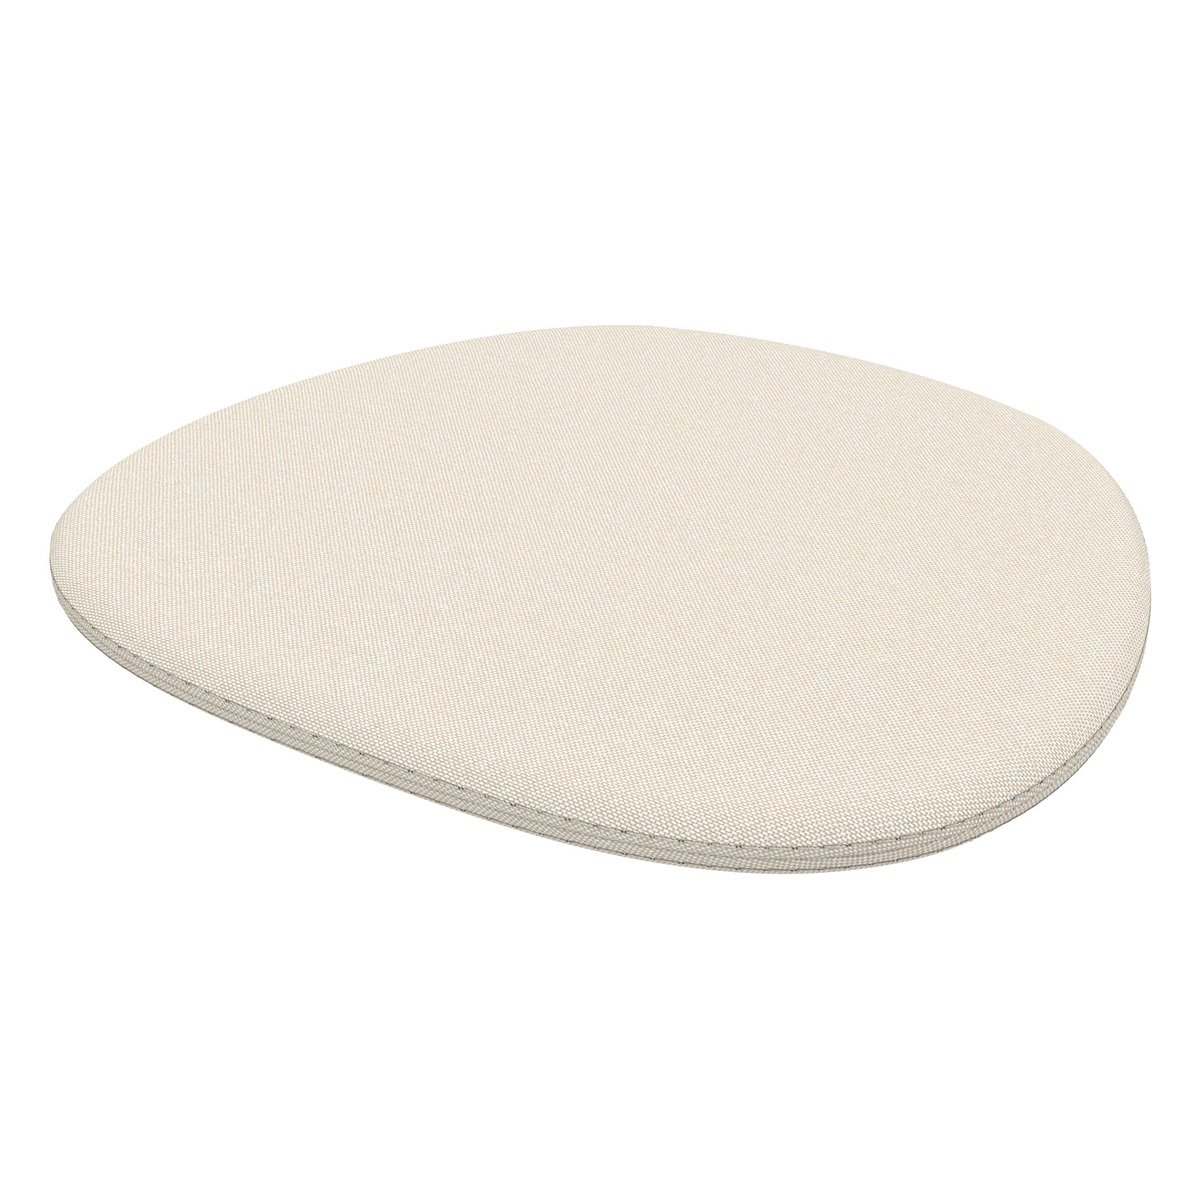 https://media.fds.fi/product_image/6269383_Soft-Seats-Type-B-Plano-parchment-cream-white-03-a_master.jpg